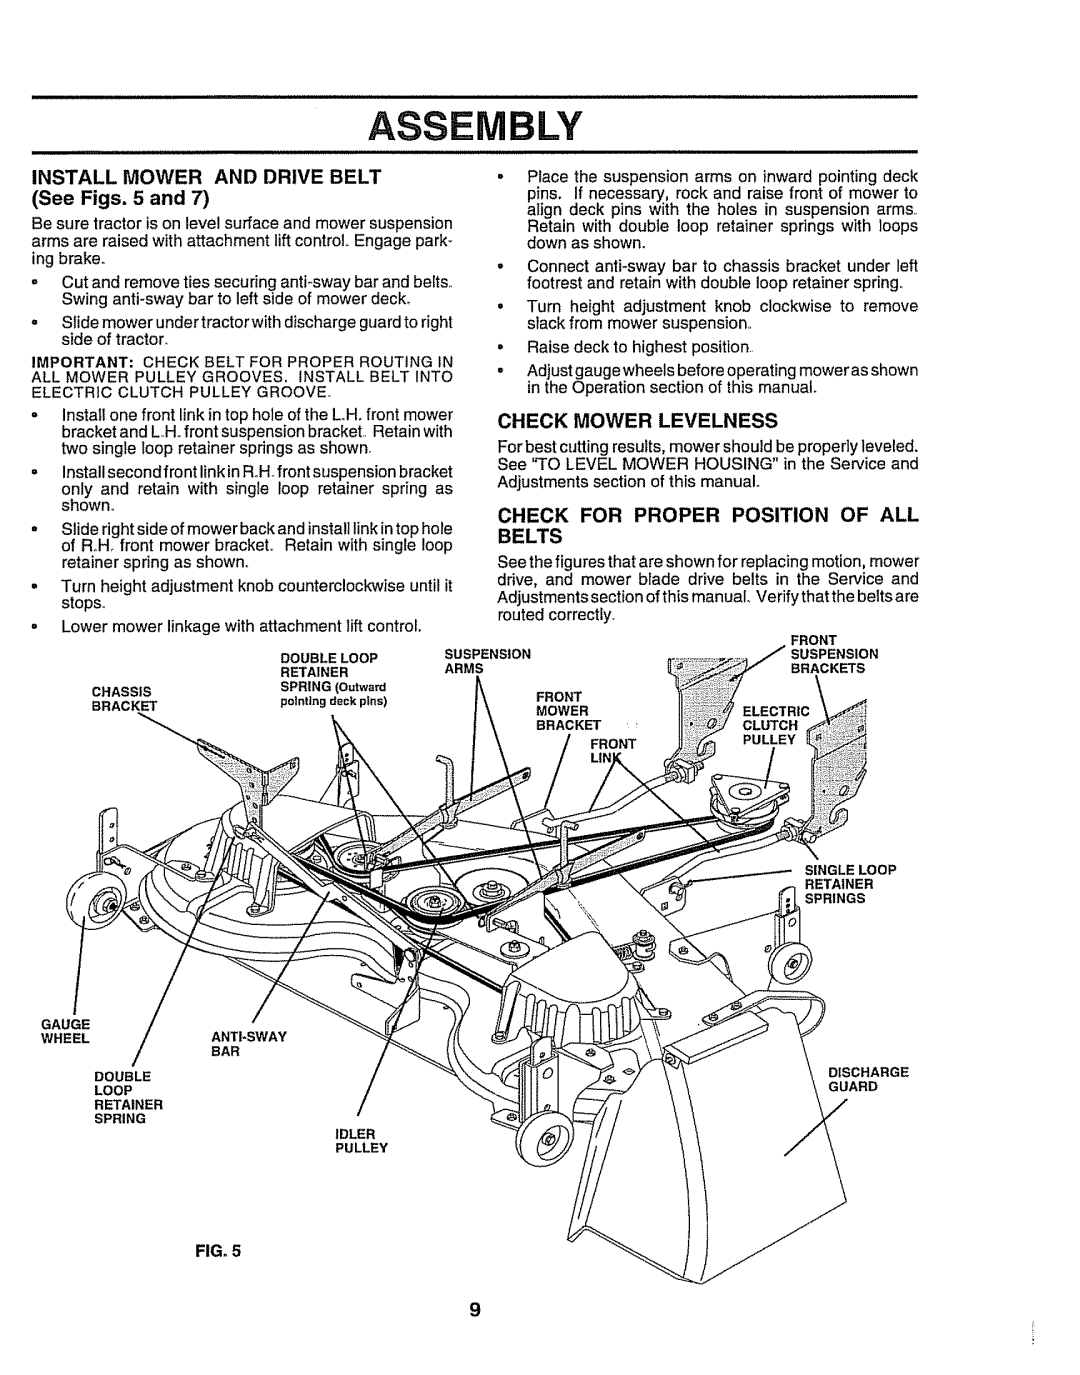 Craftsman 917.258911 owner manual Mbly, Install Mower And Drive Belt, See Figs. 5 and, Check Mower Levelness 